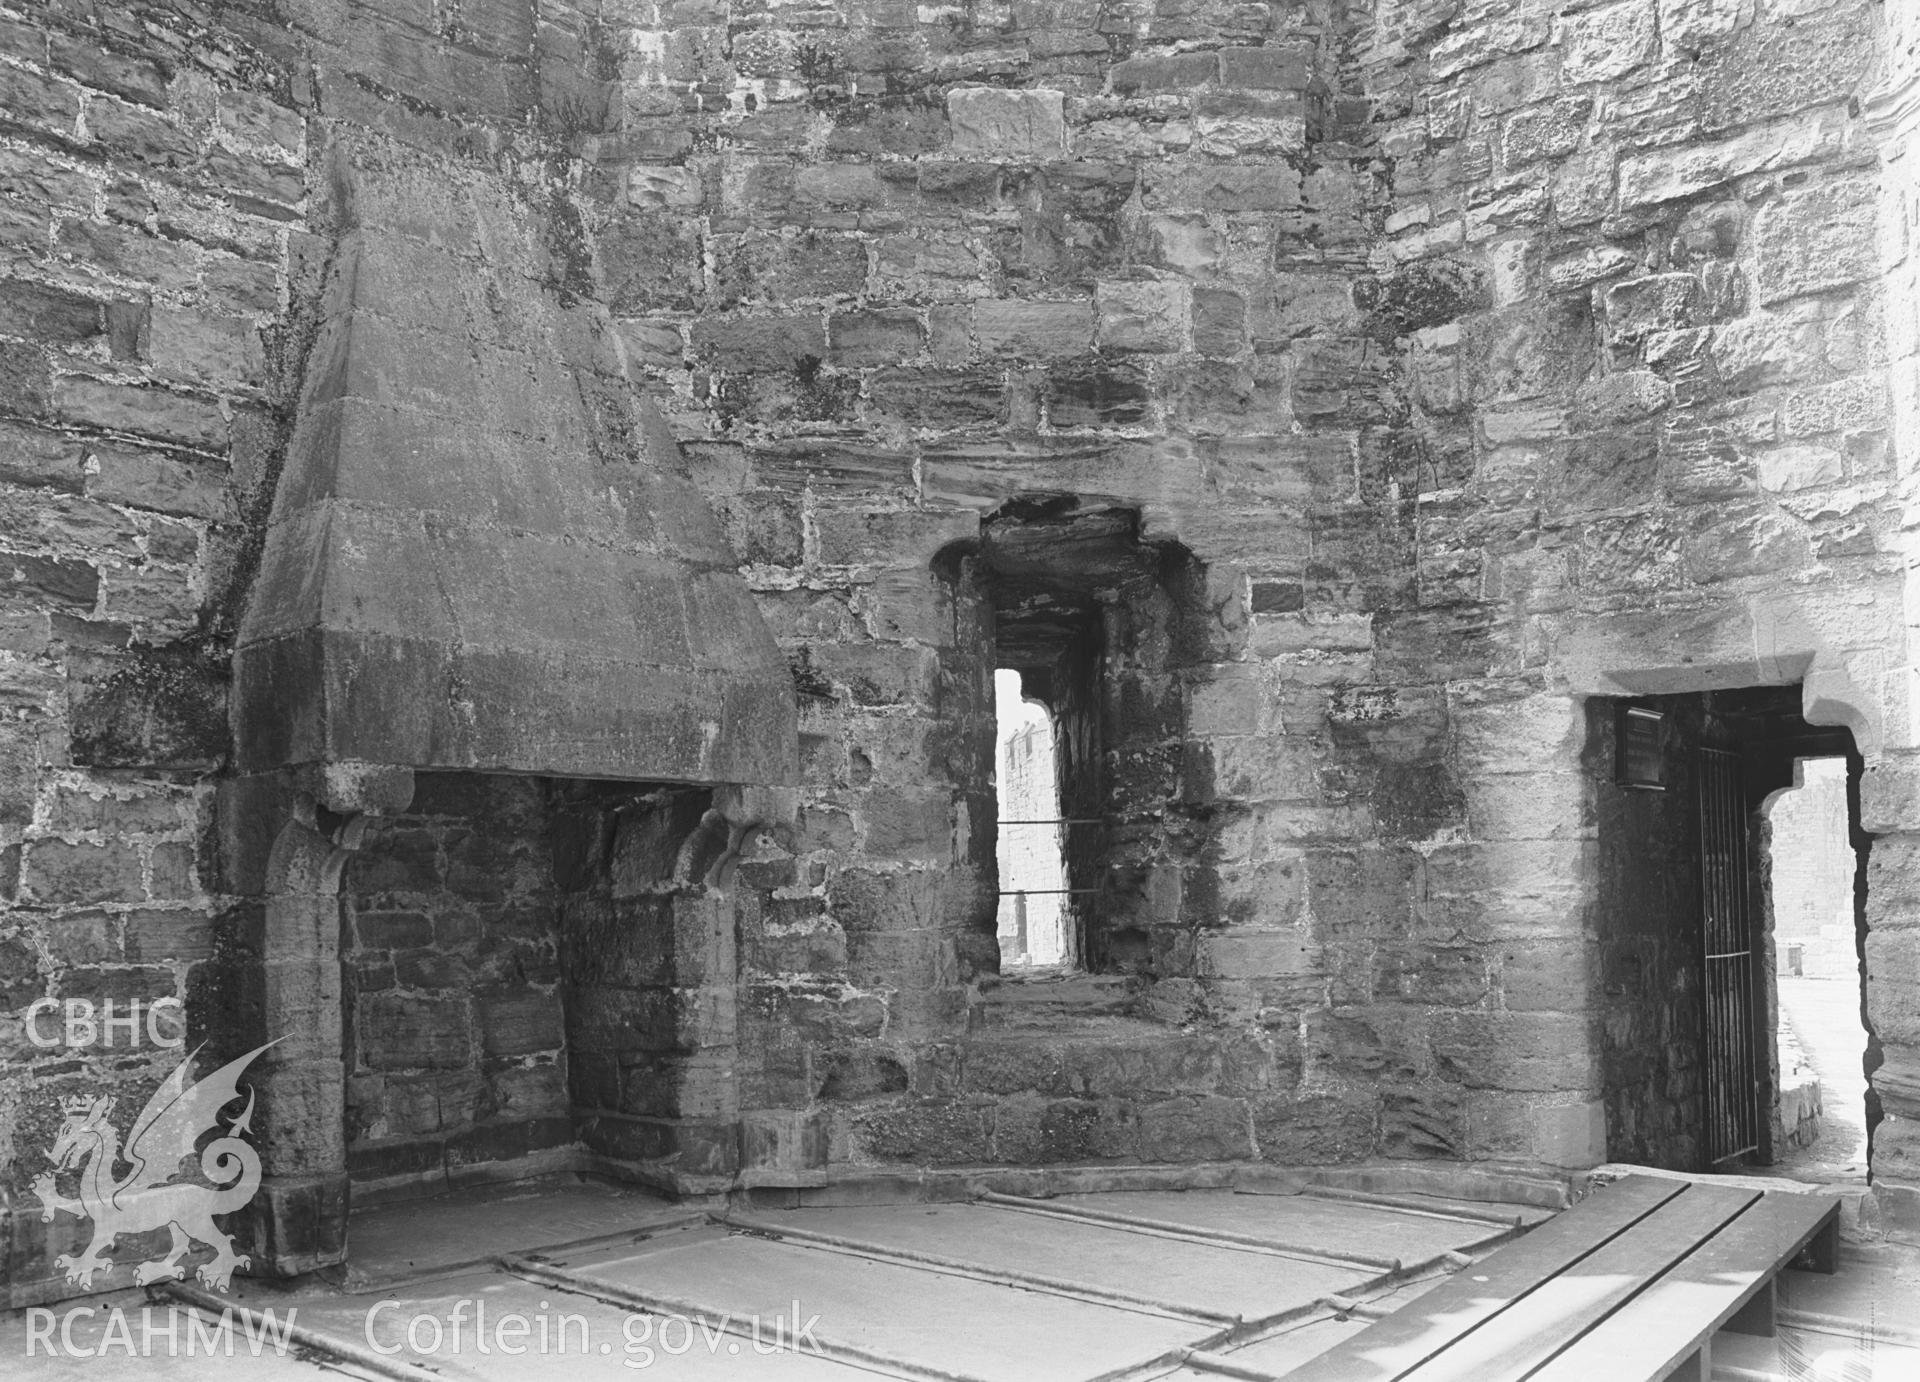 Interior view showing ground floor room in the Granary Tower.